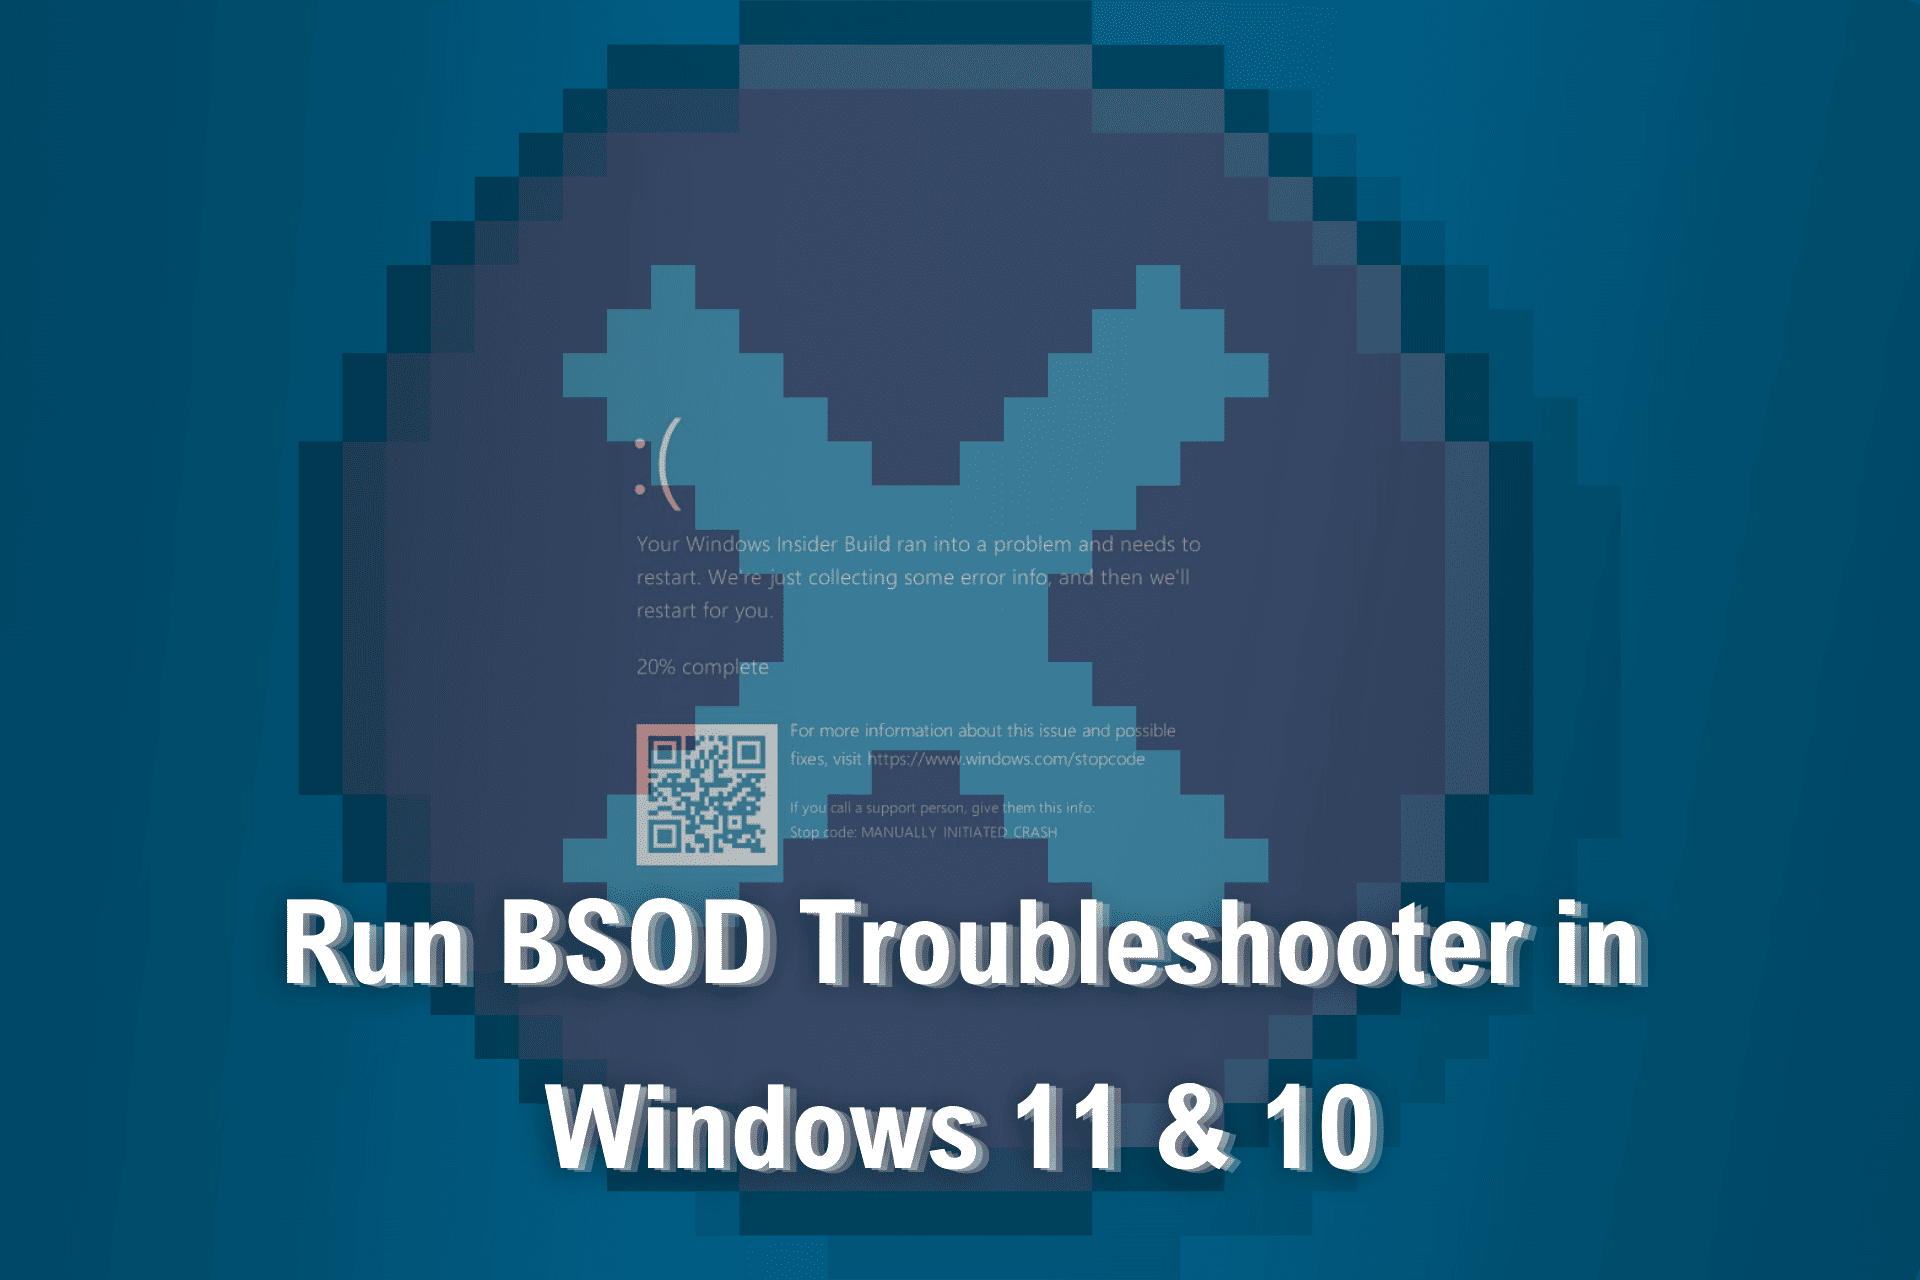 bsod troubleshooter windows 11 & 10